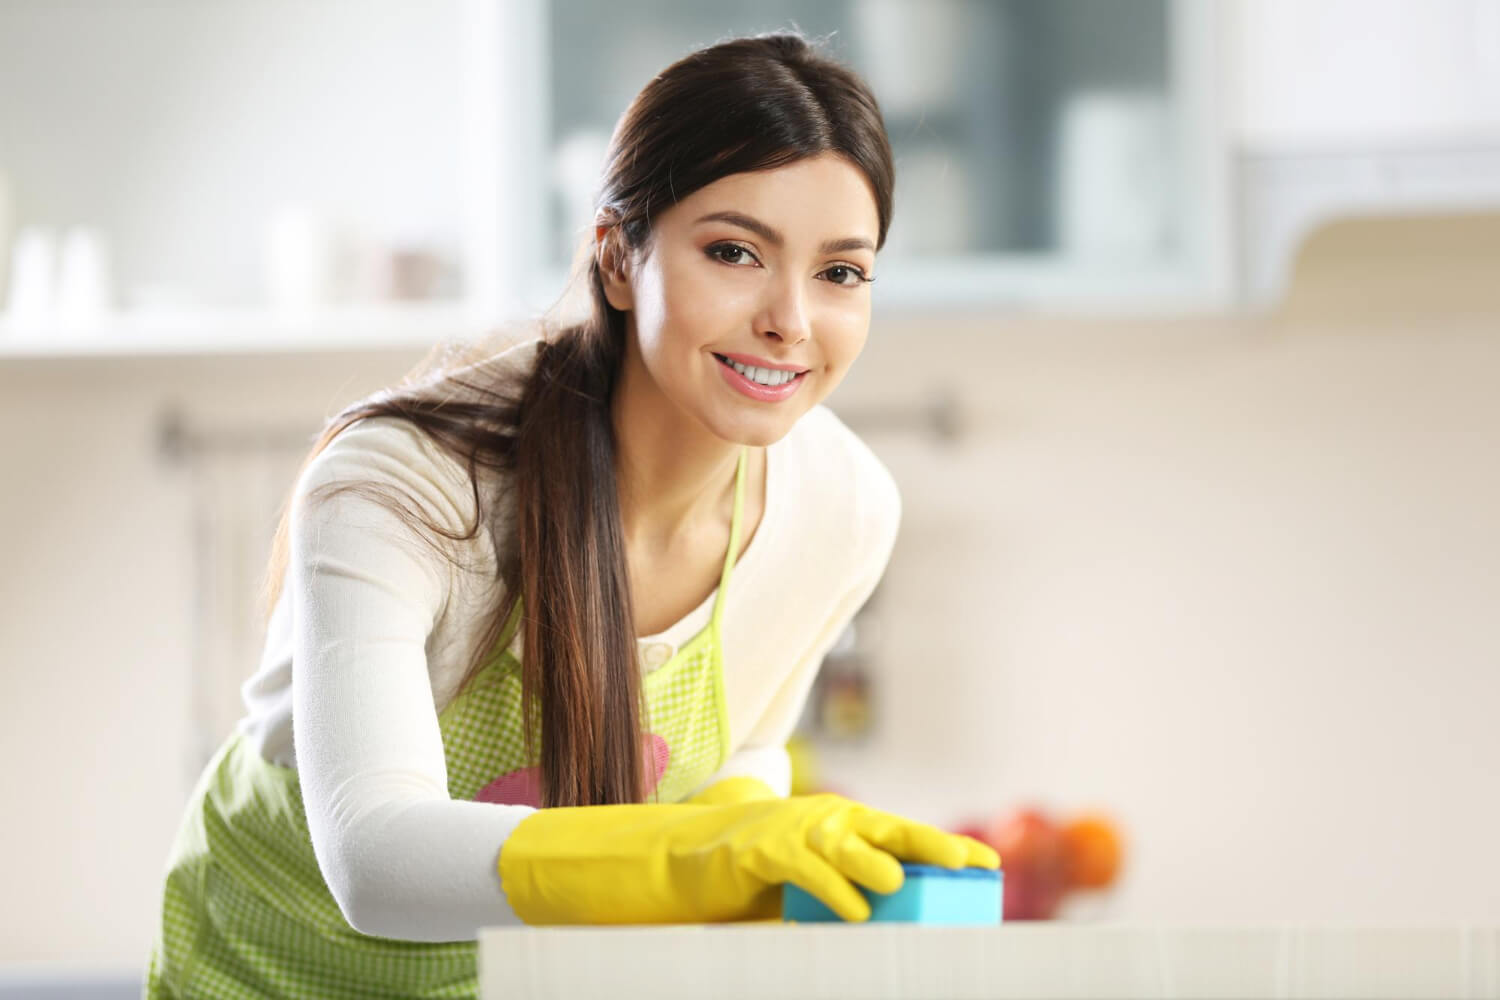 close up young woman in yellow protective gloves cleaning appliance with blue sponge while smilling at camera